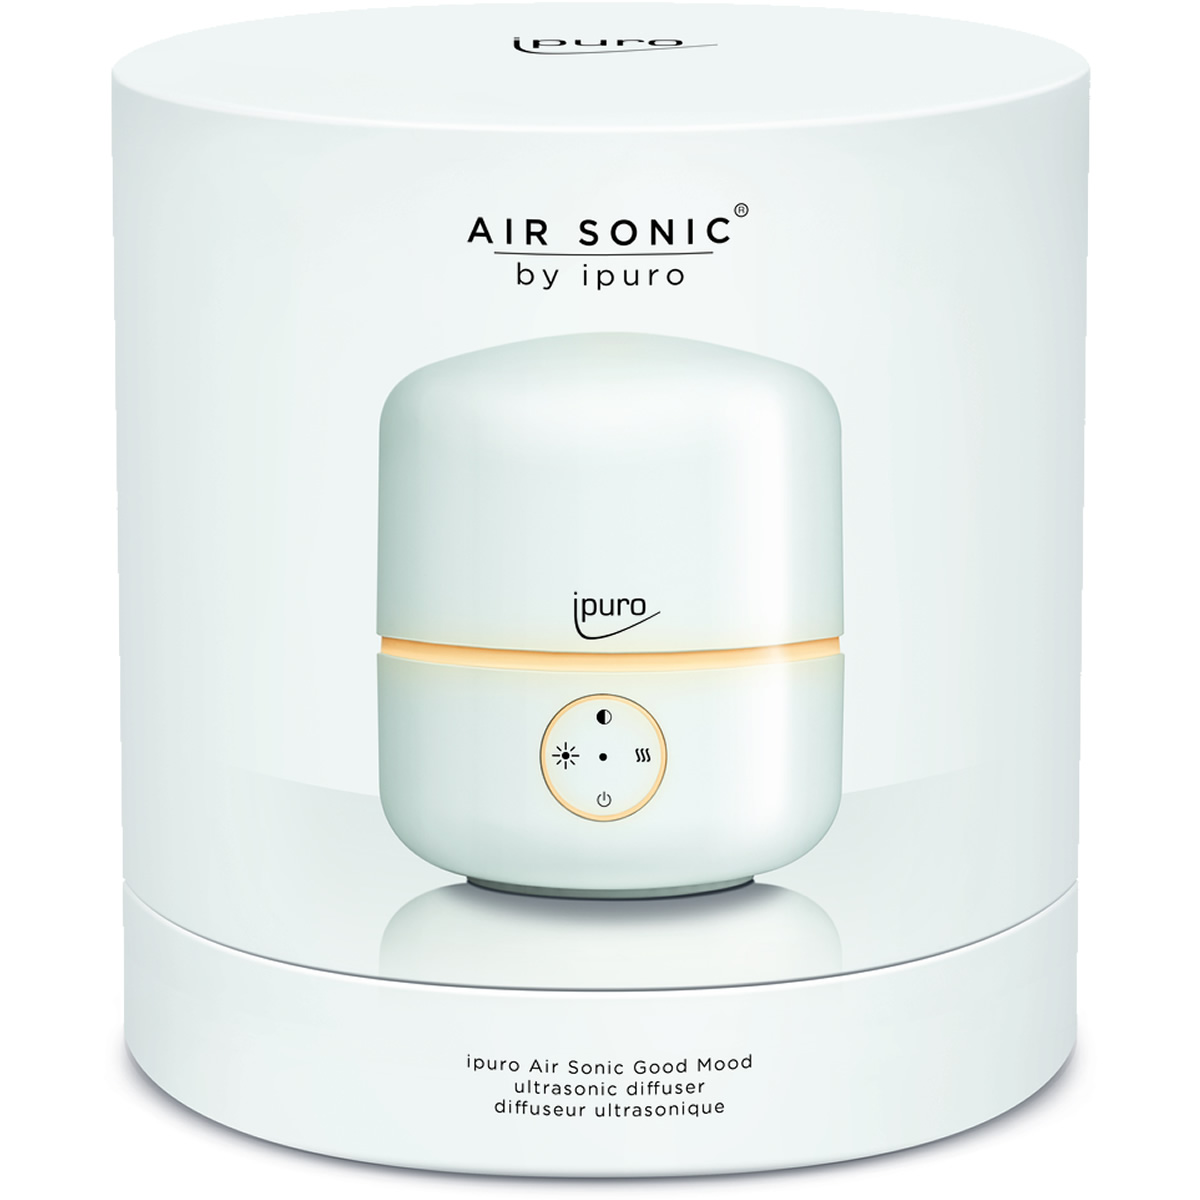 ipuro Air Sonic Aroma Diffusor, Good Mood White - Buy online now